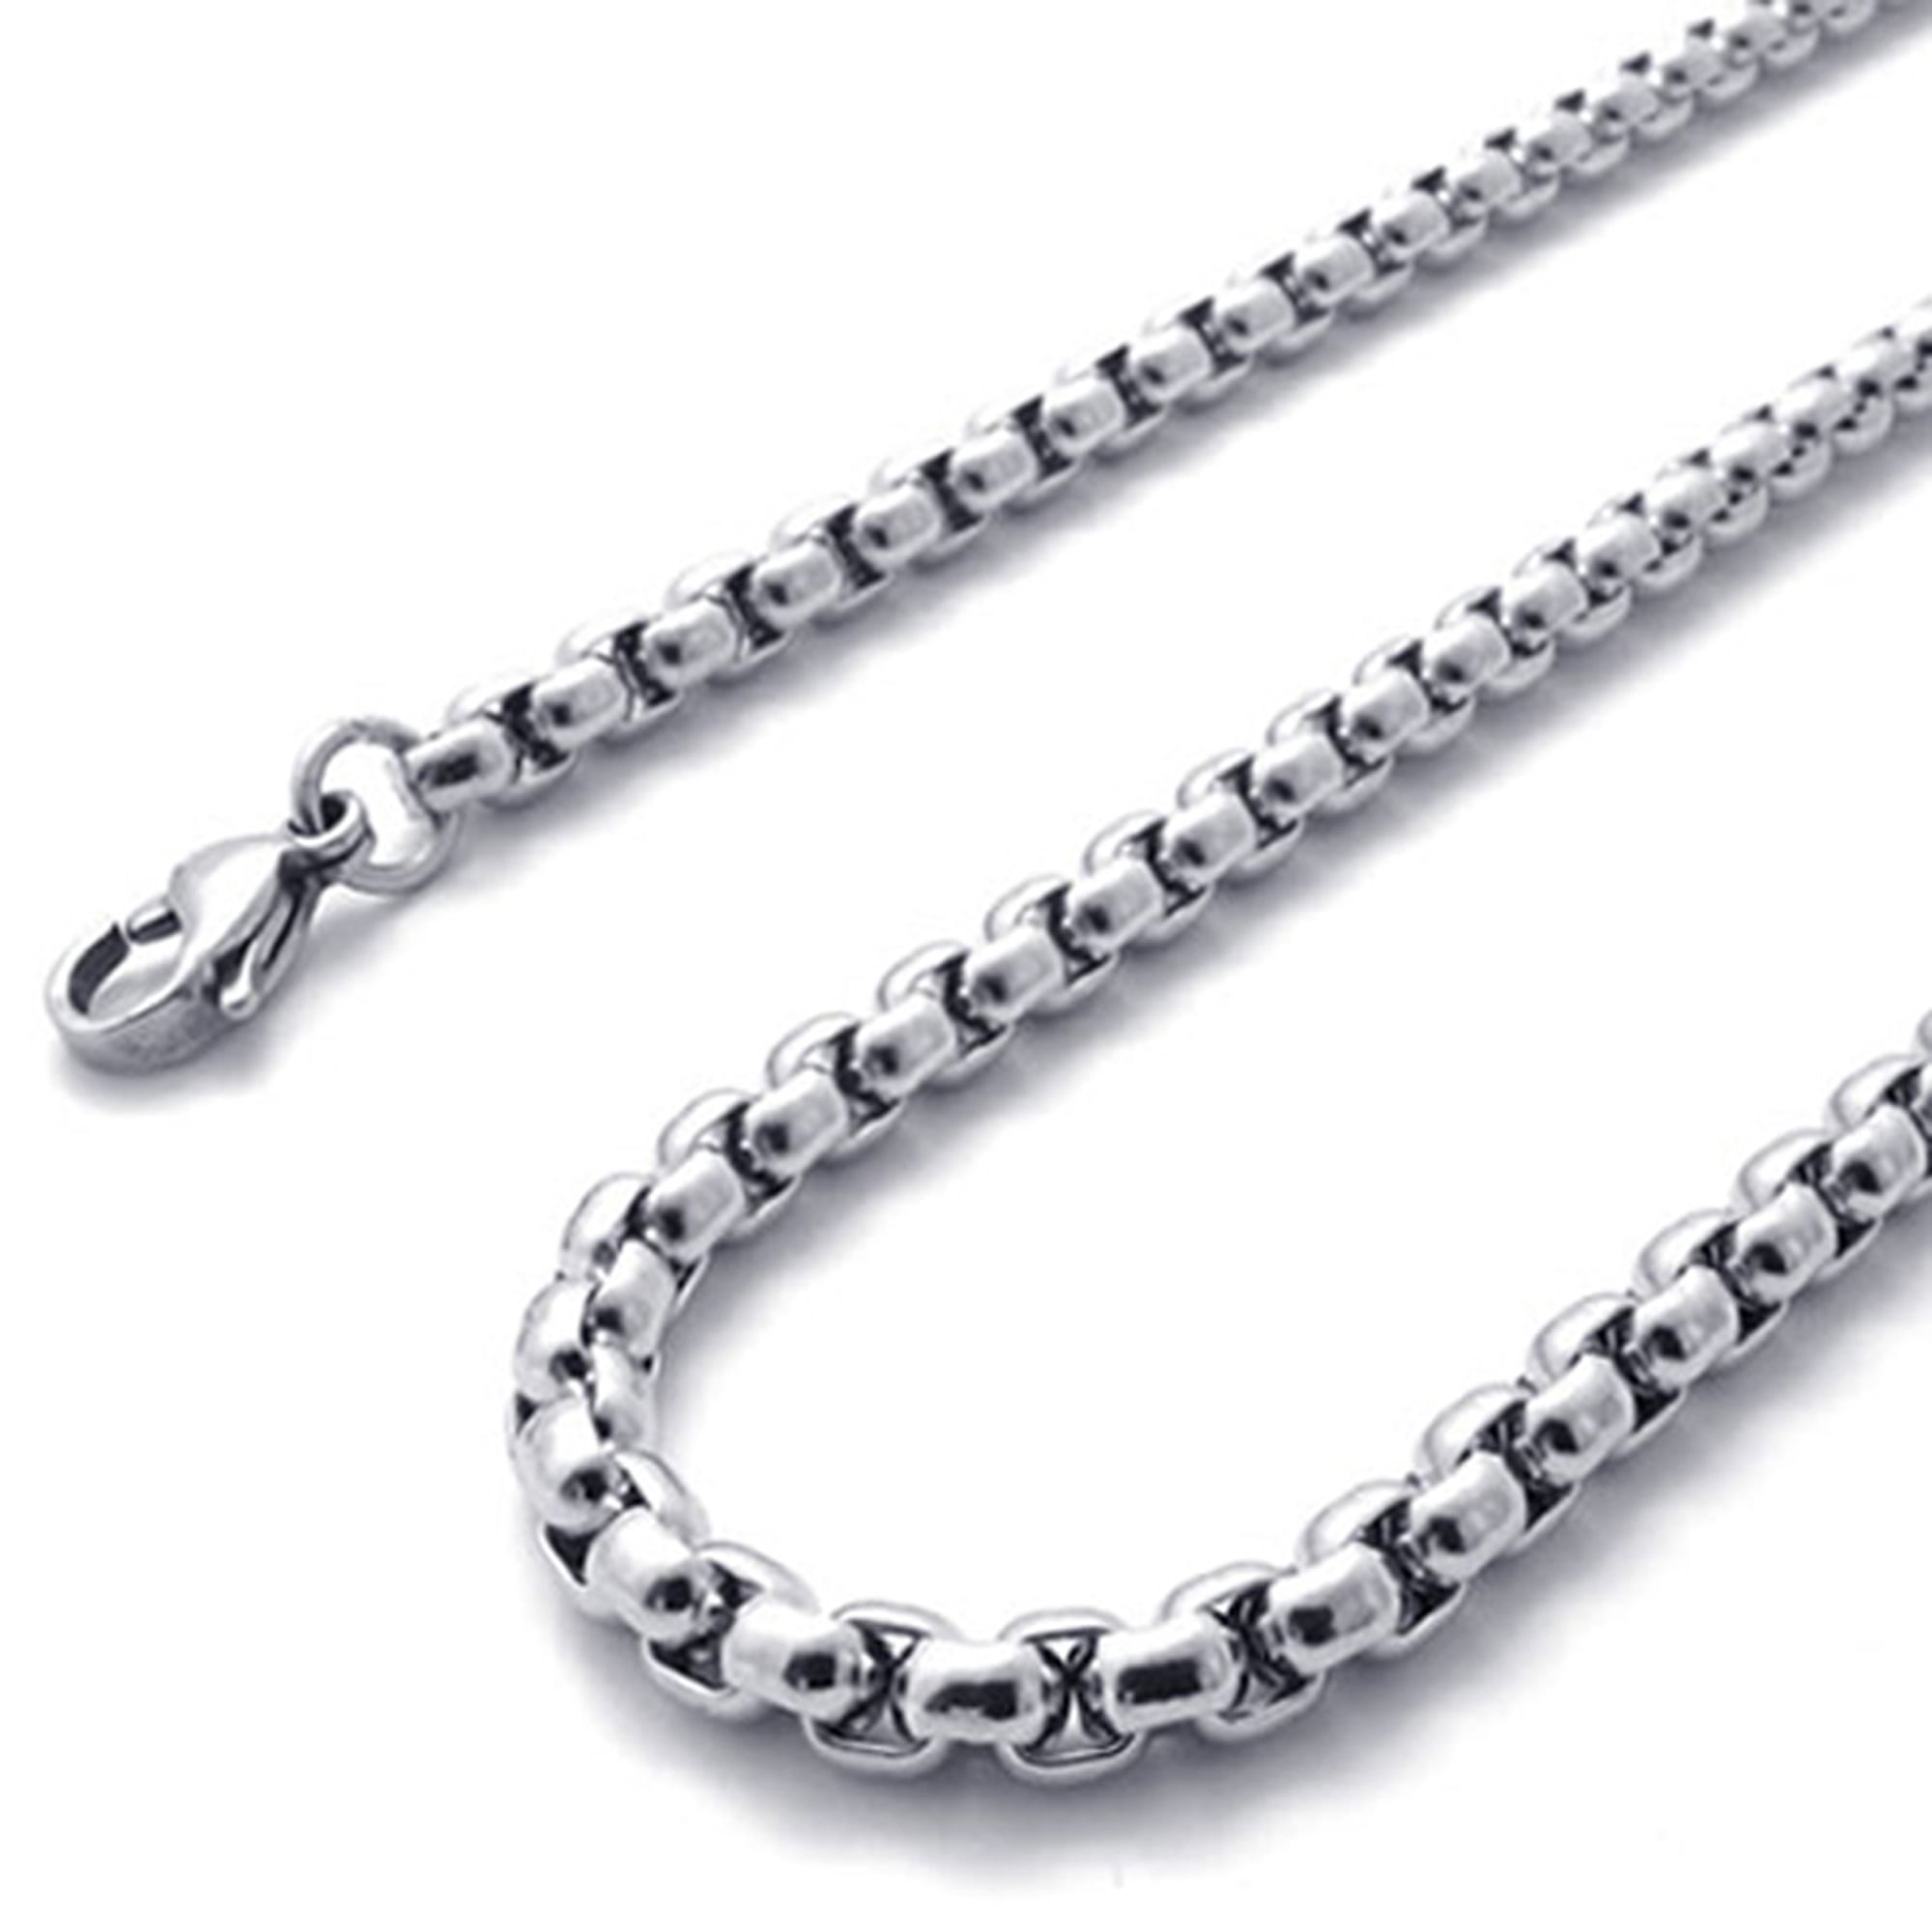 Dancing Stone Mens Jewelry 2mm-5mm 16-40 Silver Stainless Steel Cross Necklace Chain